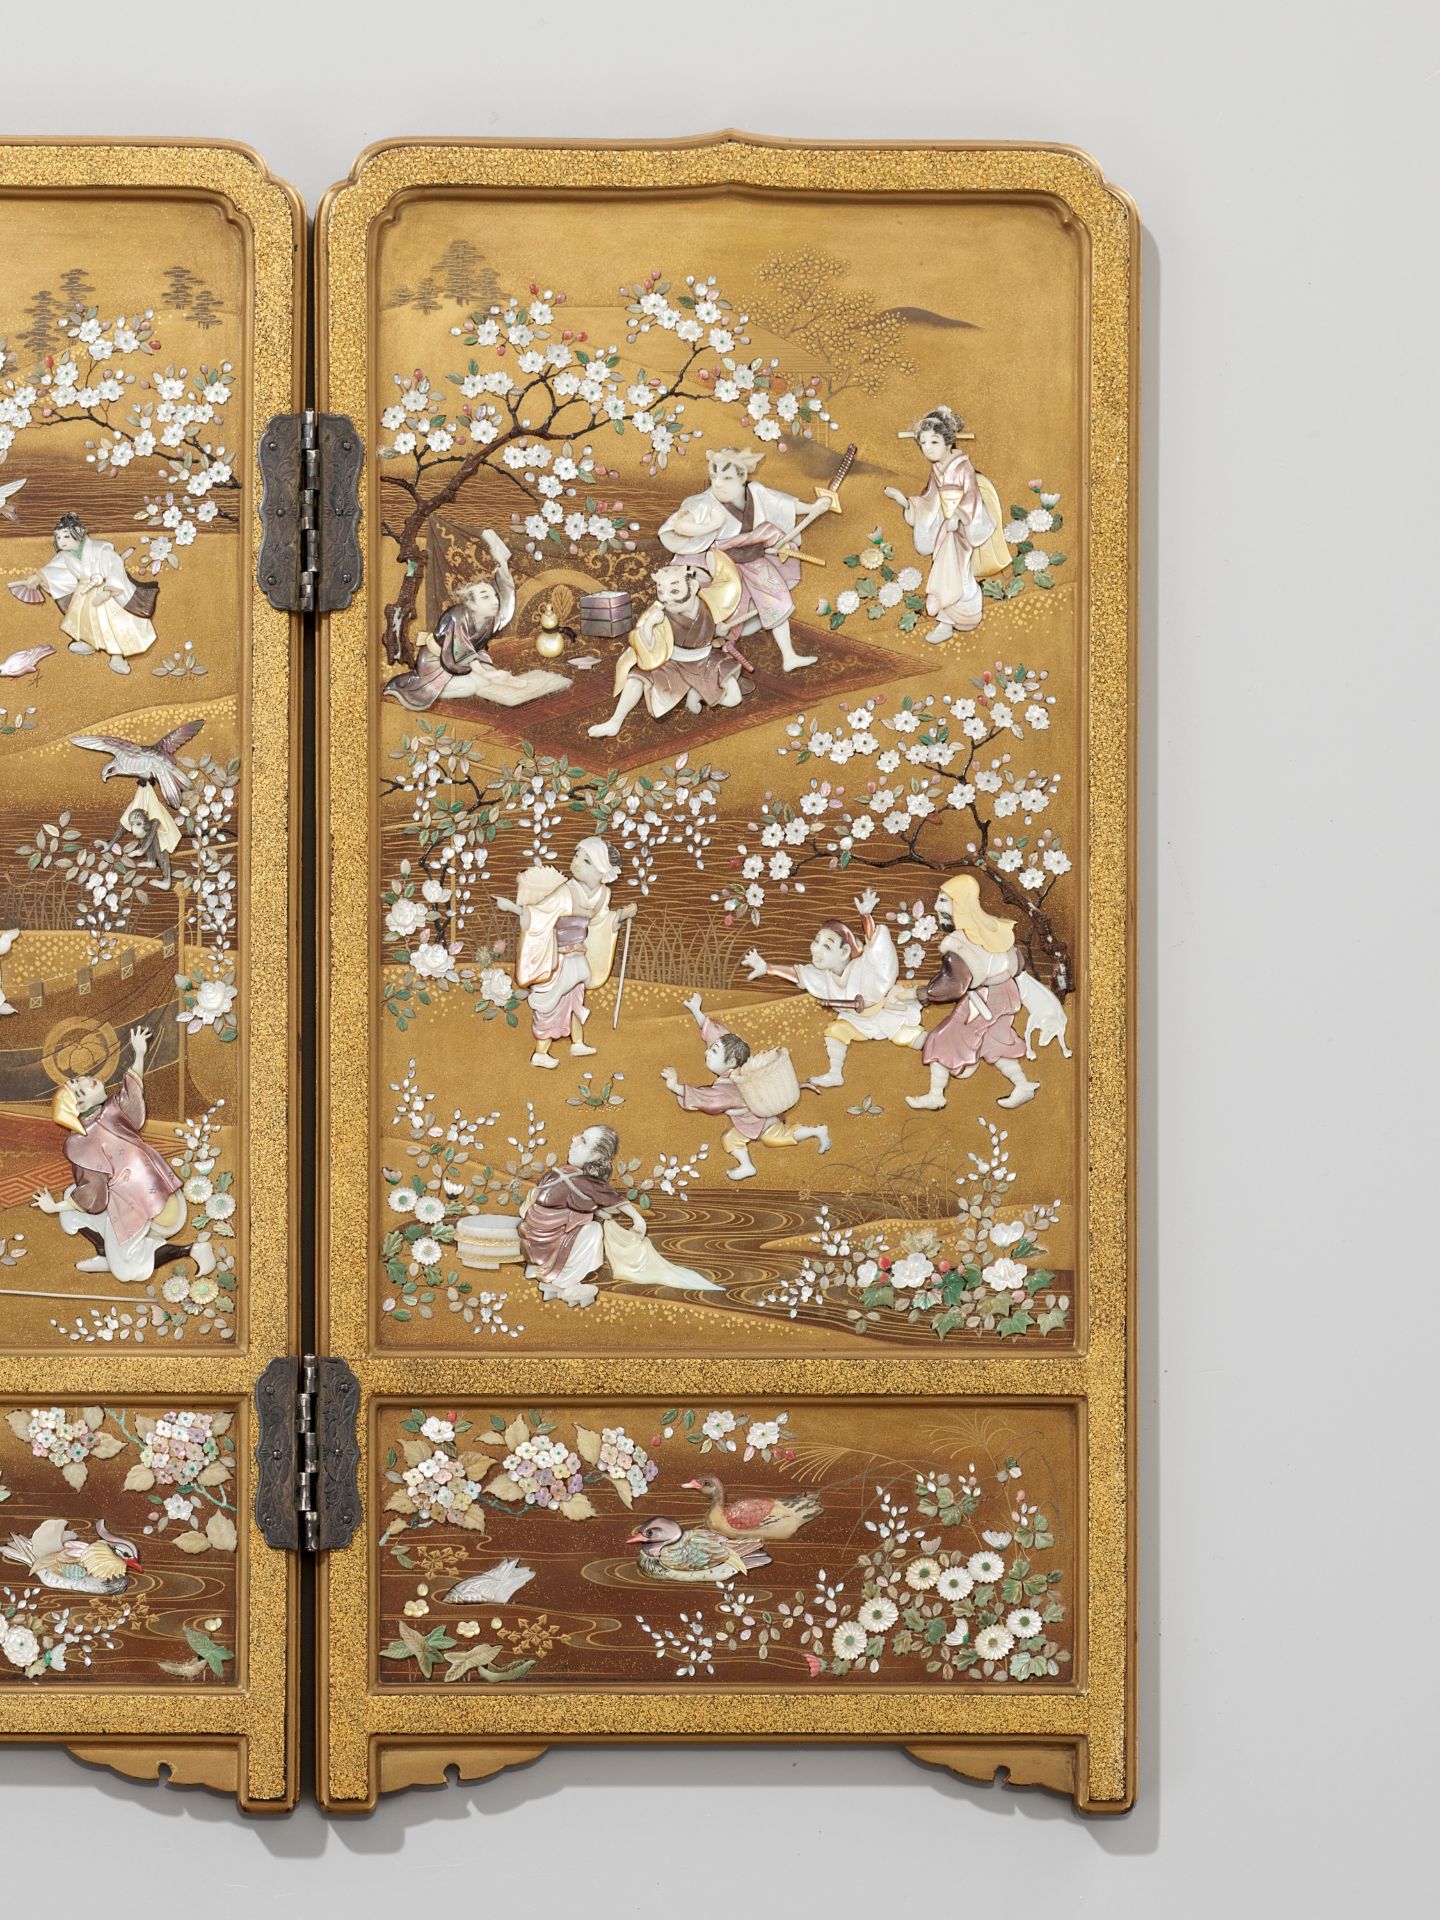 A RARE AND SUPERB SHIBAYAMA-STYLE INLAID GOLD LACQUER TABLE SCREEN WITH KYOSAI'S ANIMAL CIRCUS - Image 11 of 11